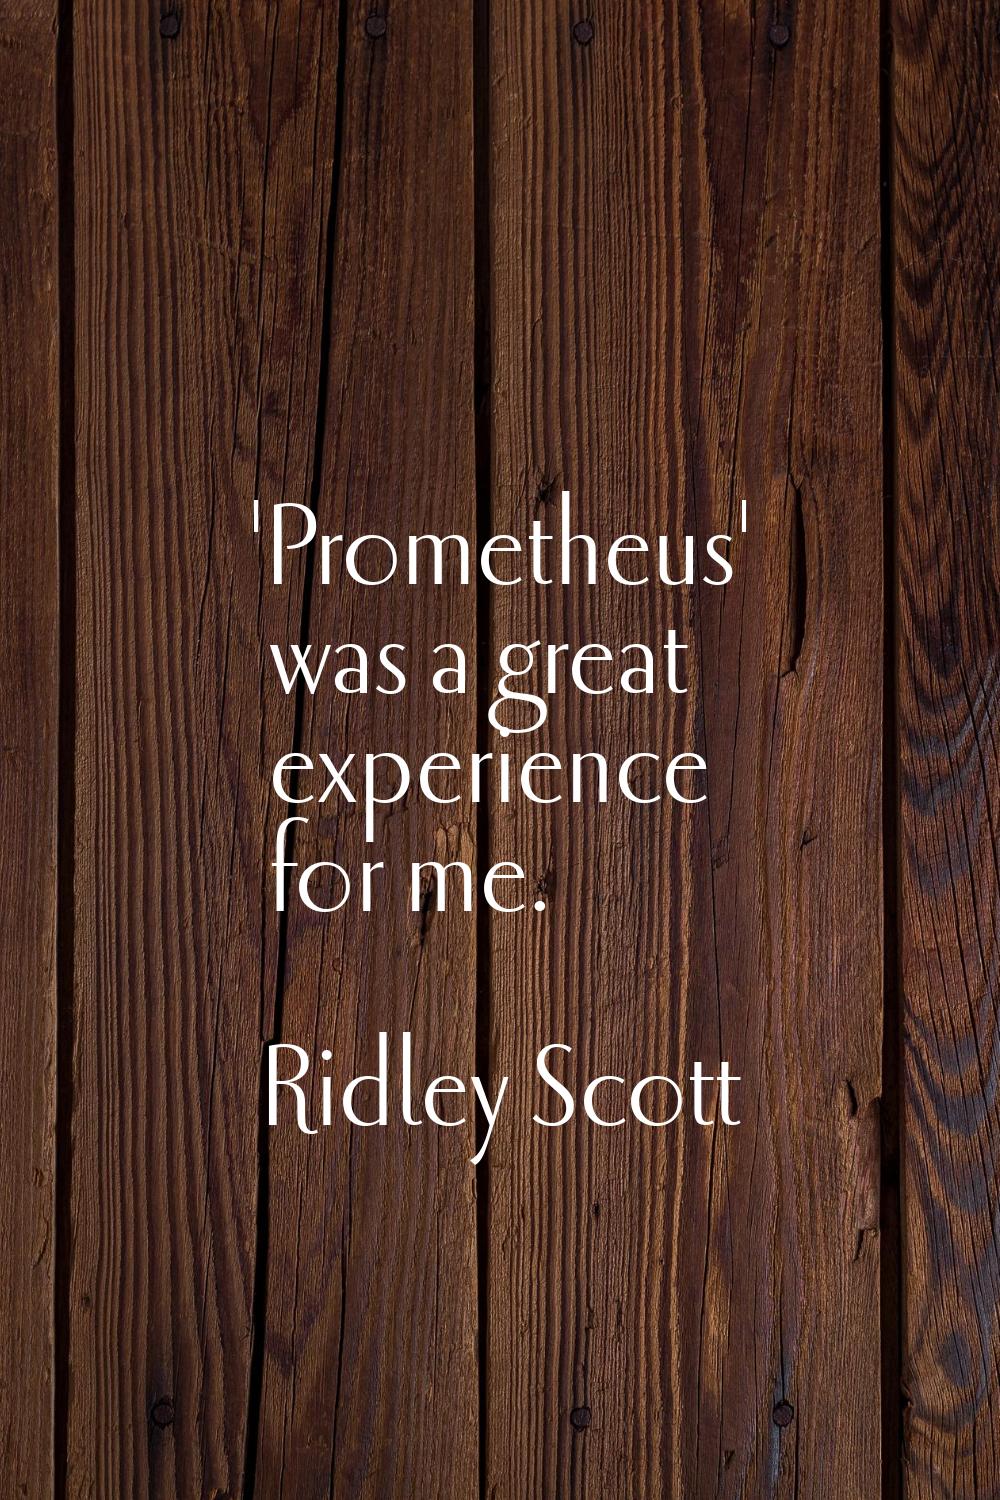 'Prometheus' was a great experience for me.